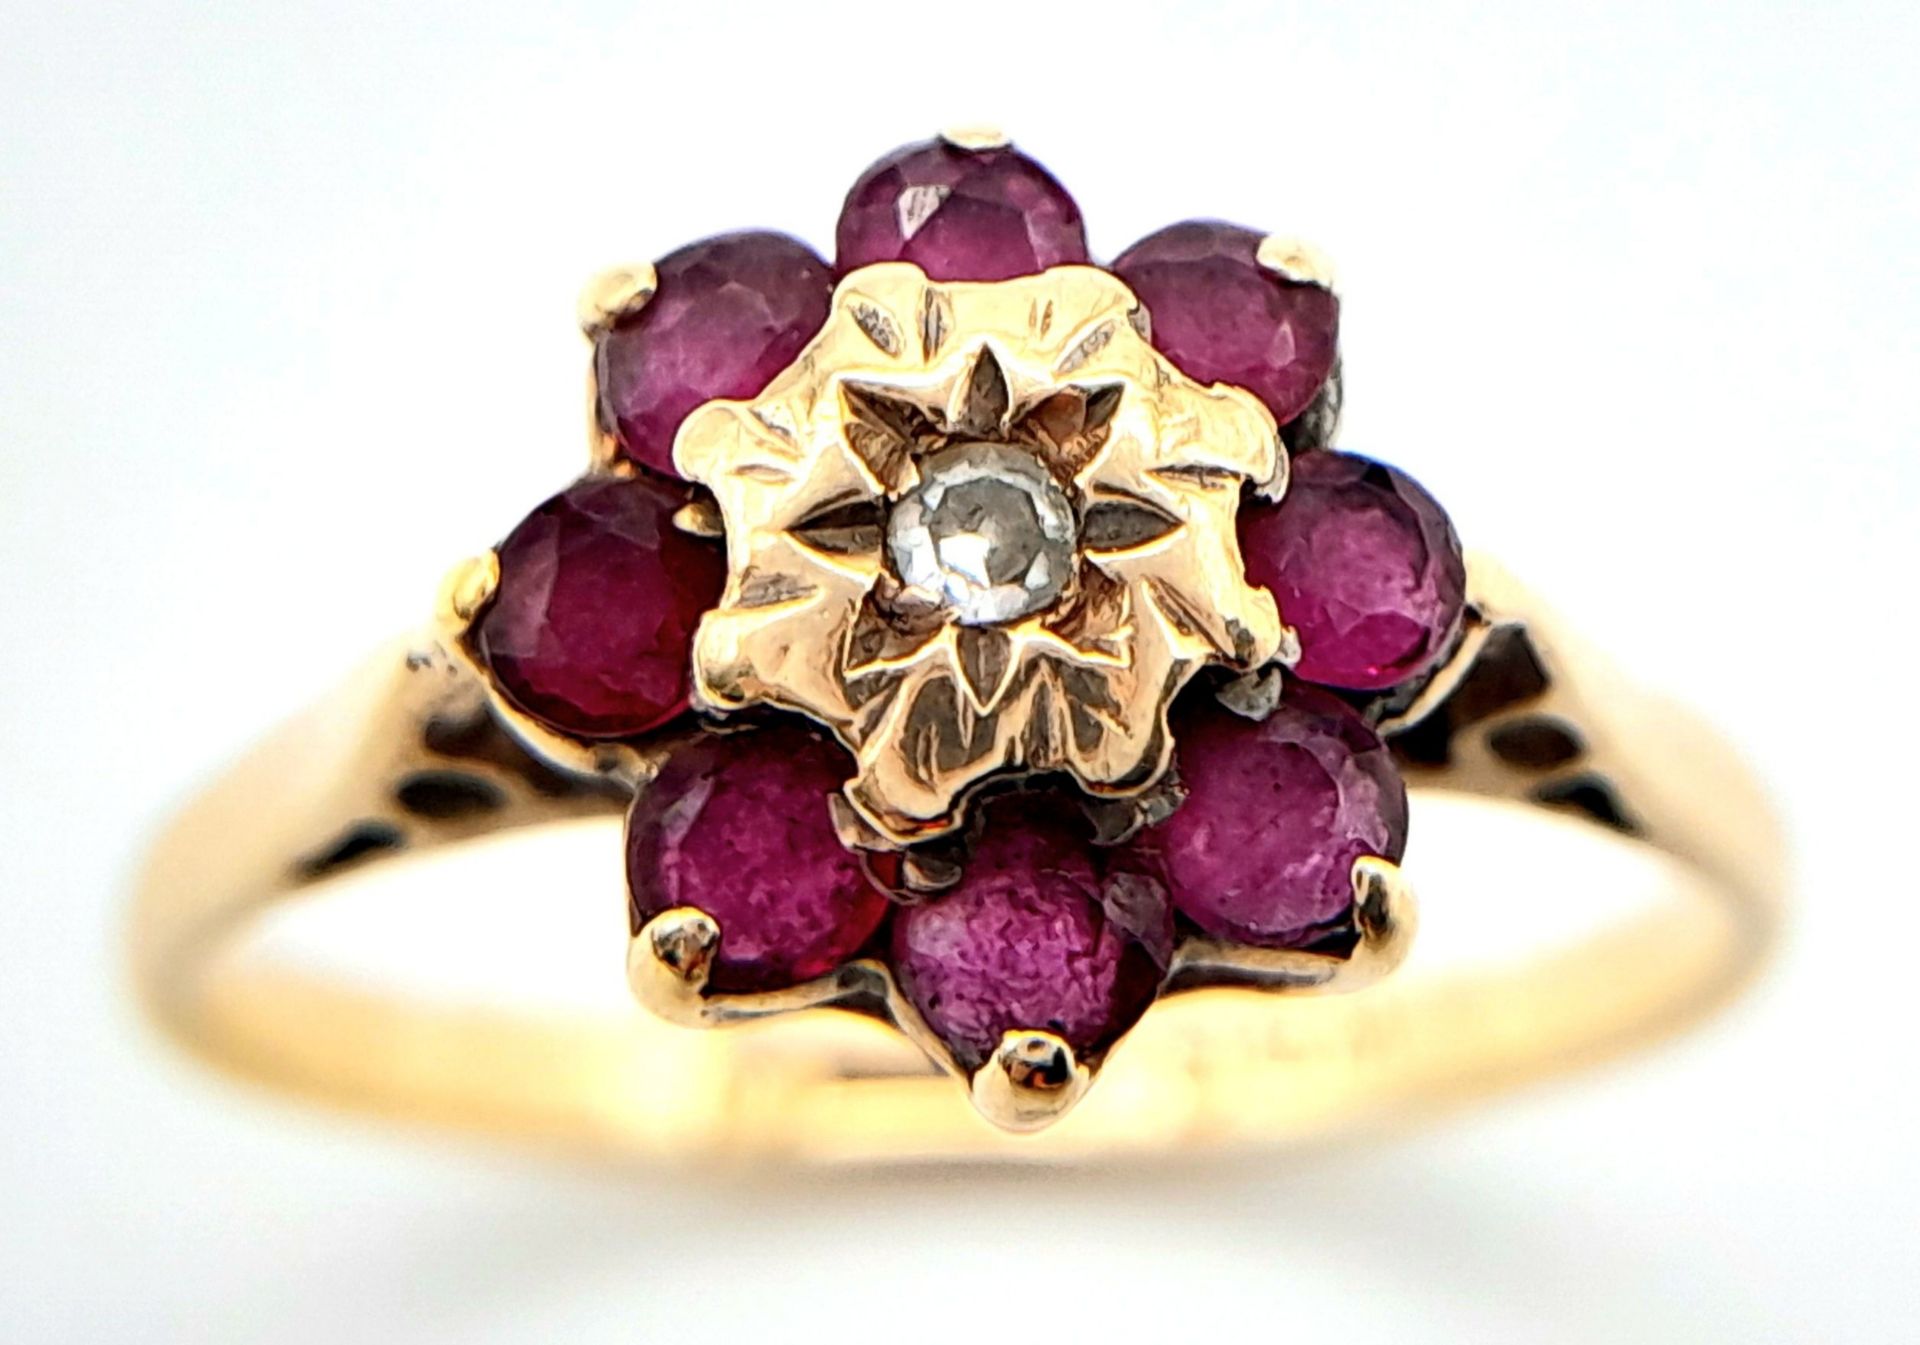 A 9K YELLOW GOLD DIAMOND & RUBY CLUSTER RING. Size M, 1.7g total weight. Ref: SC 8015 - Image 3 of 6